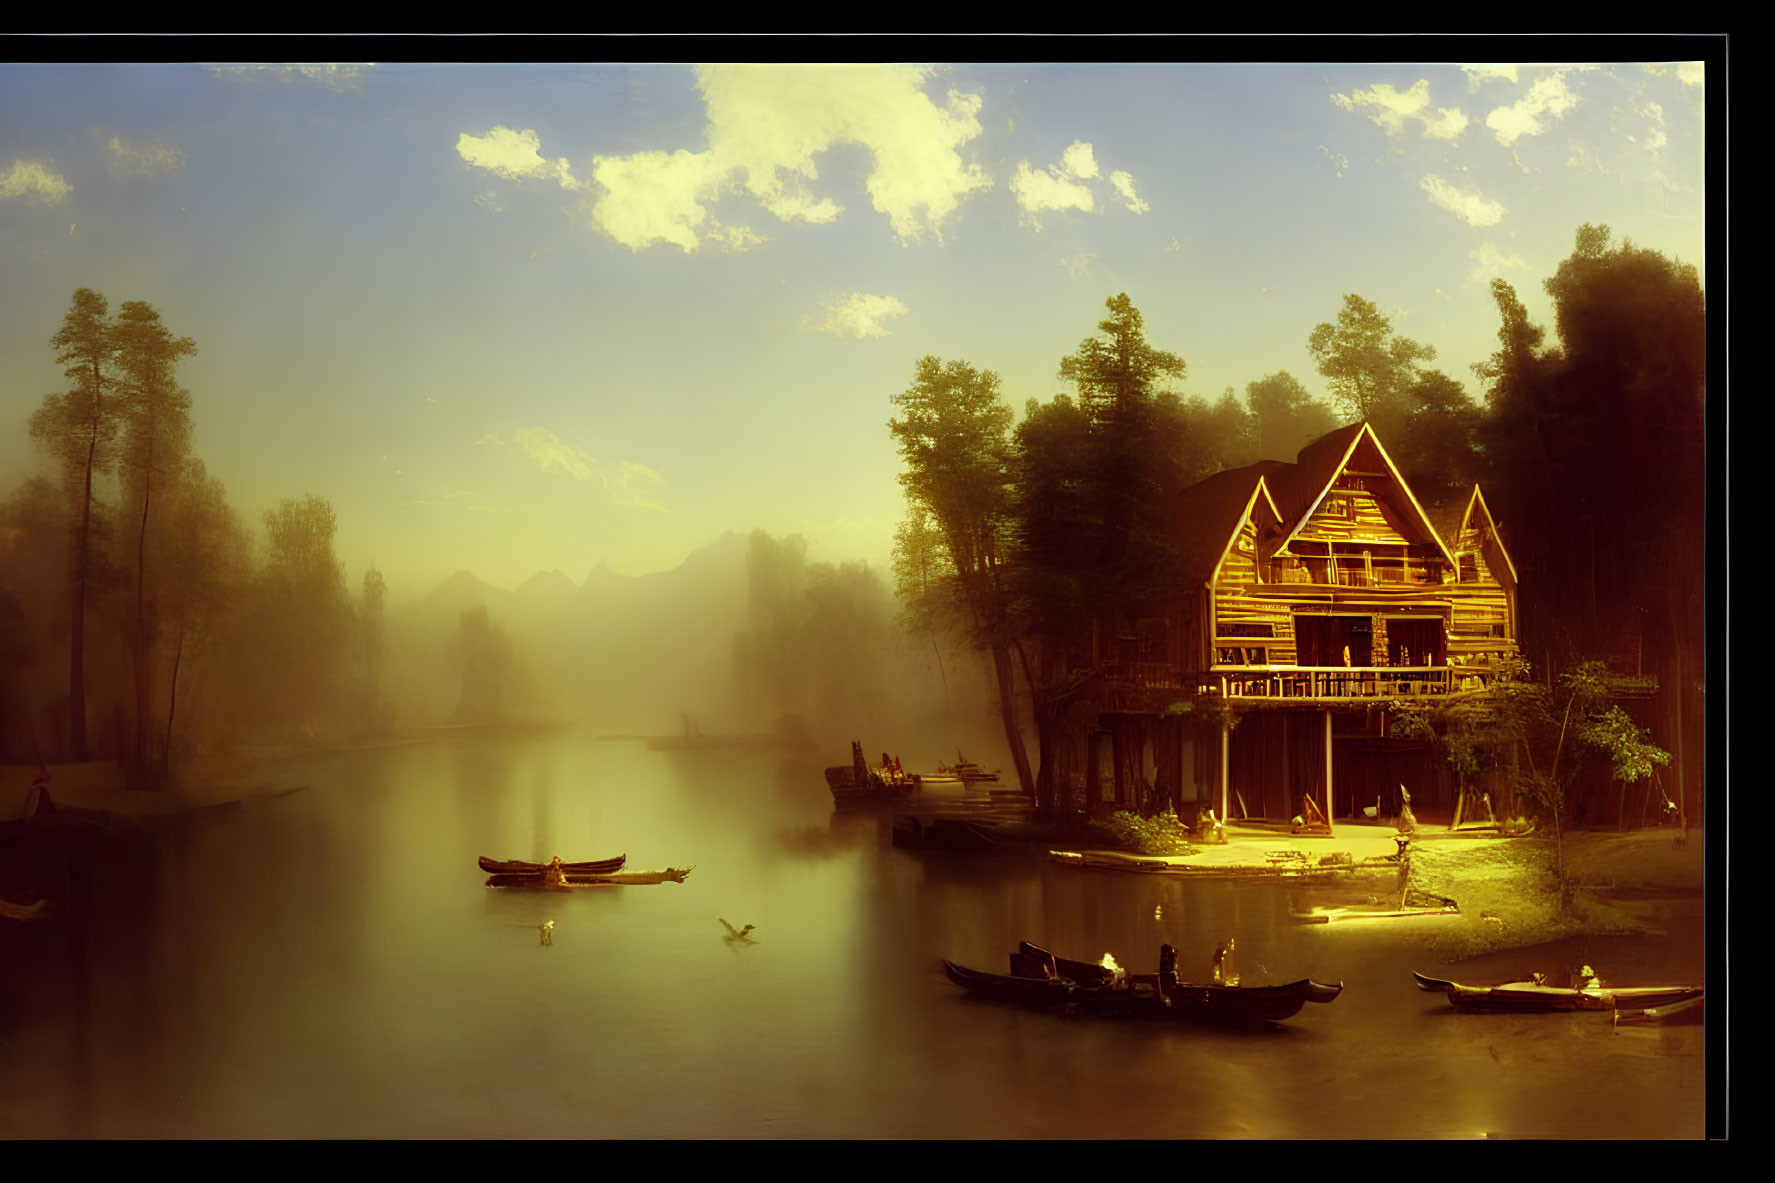 Tranquil lake landscape with wooden house, boats, trees, and golden sky